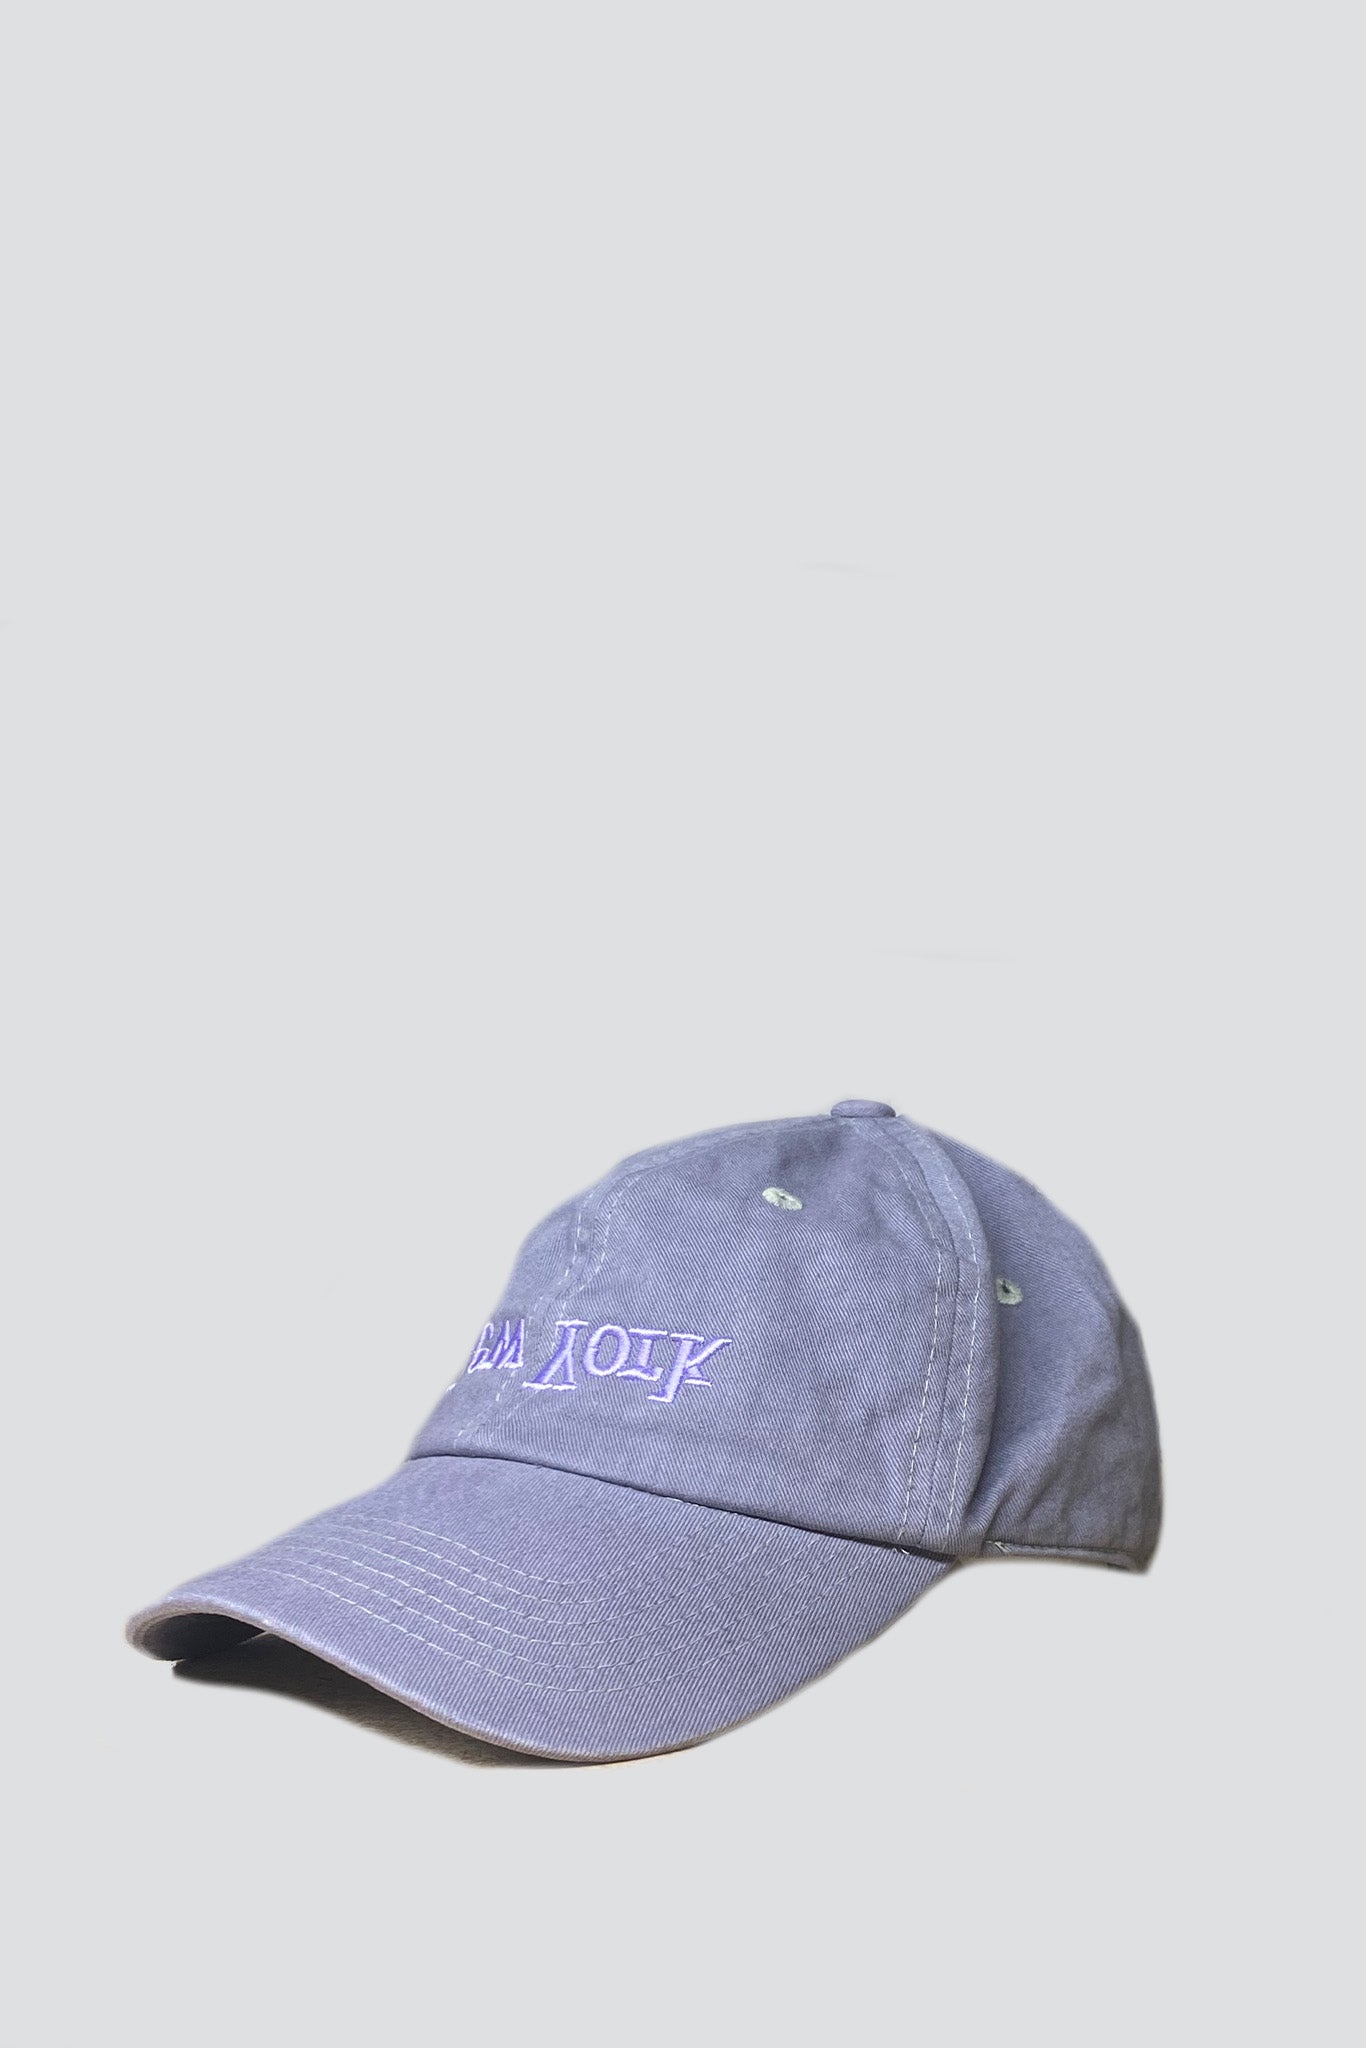 New York Embroidered Hat - Lilac